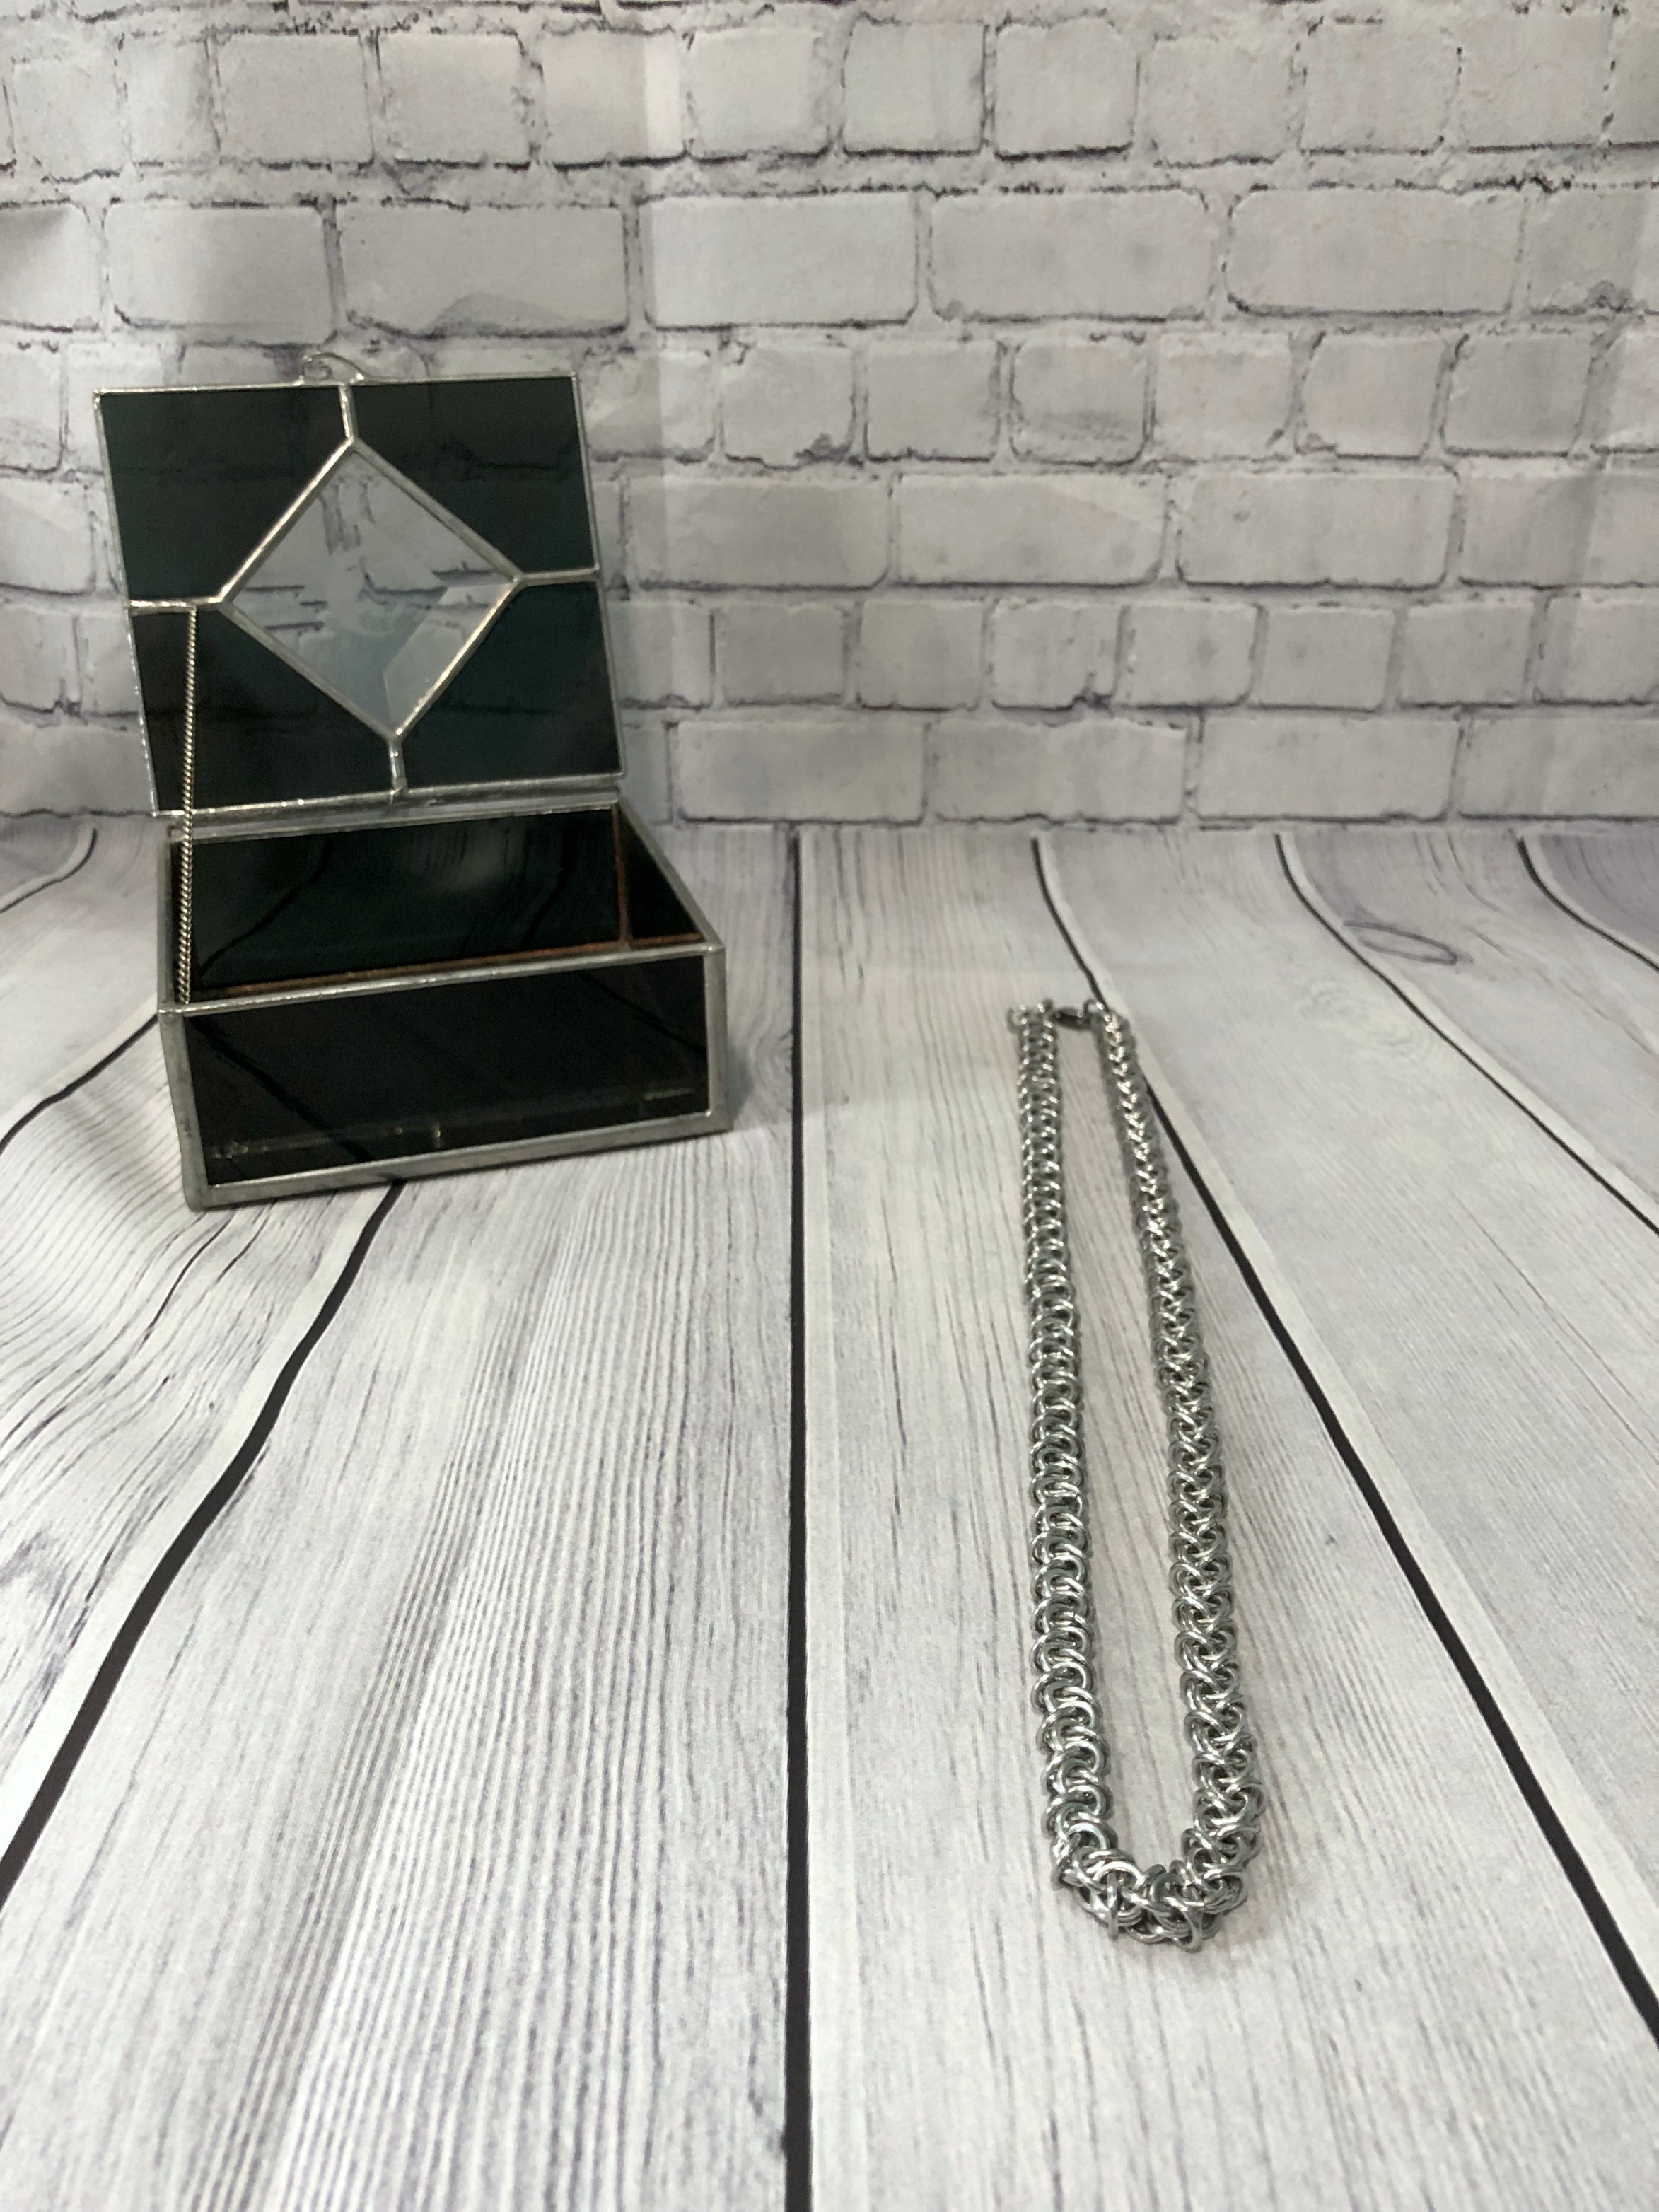 Chainmaille Necklace